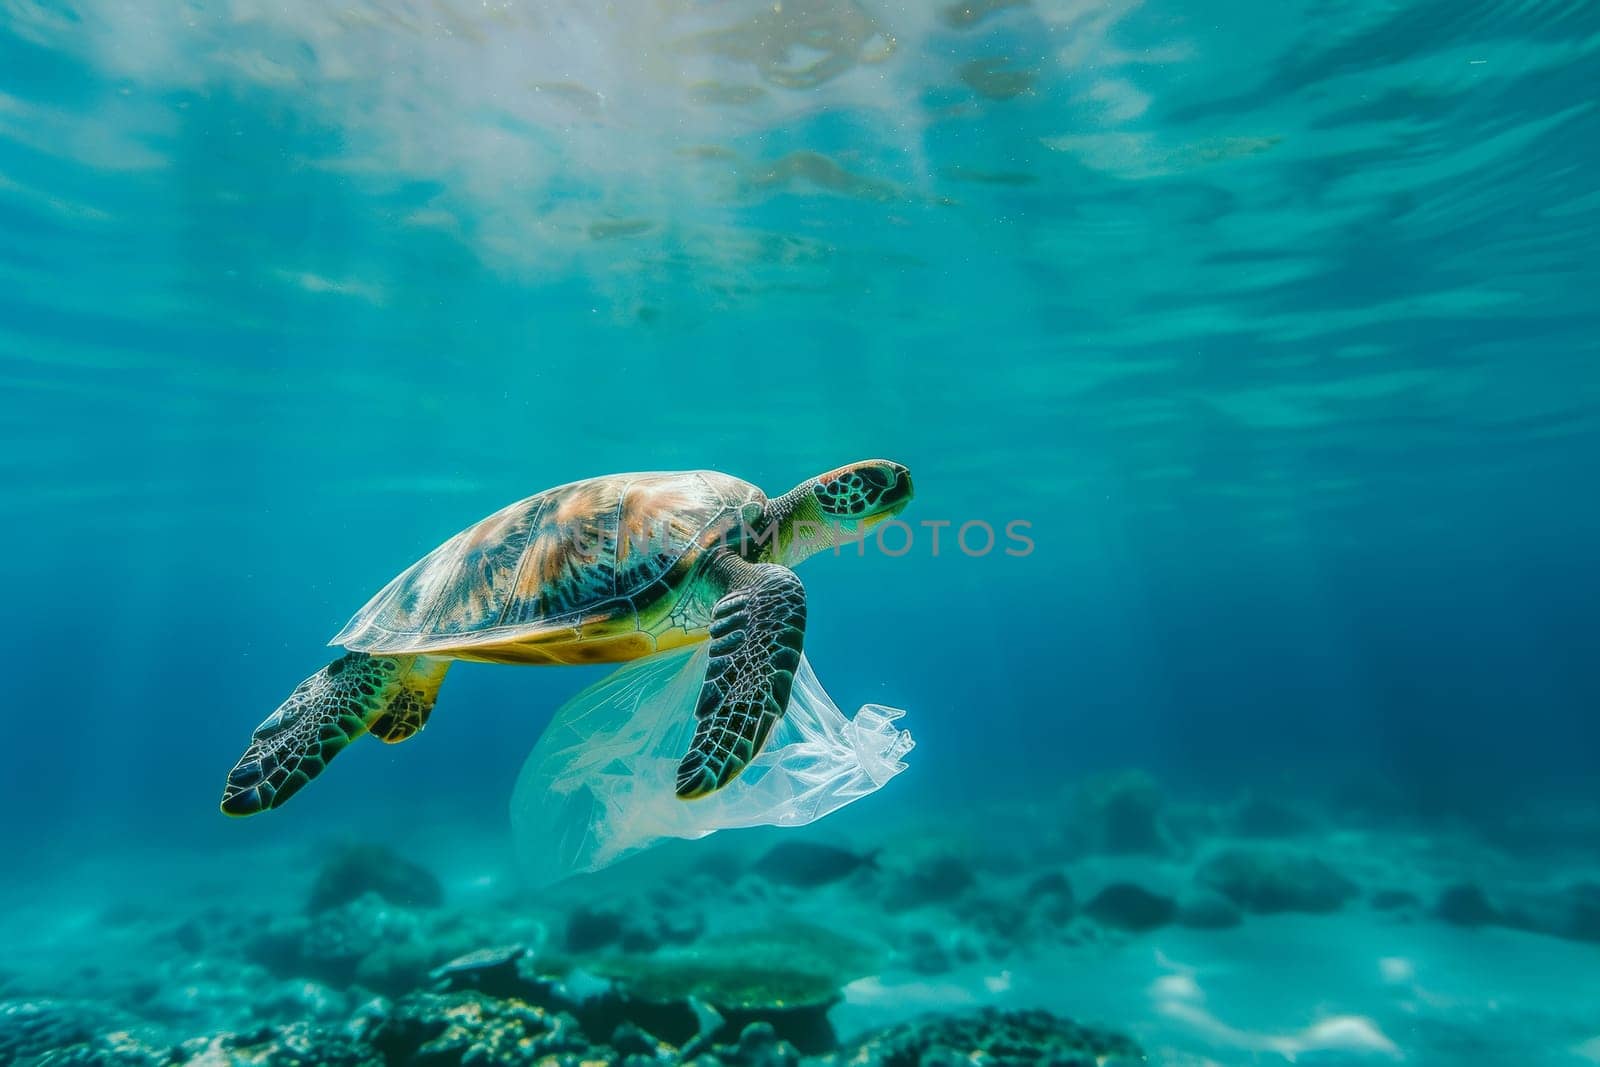 A turtle is seen swimming over a plastic bag floating in the ocean. This image highlights the issue of marine pollution caused by plastic waste.